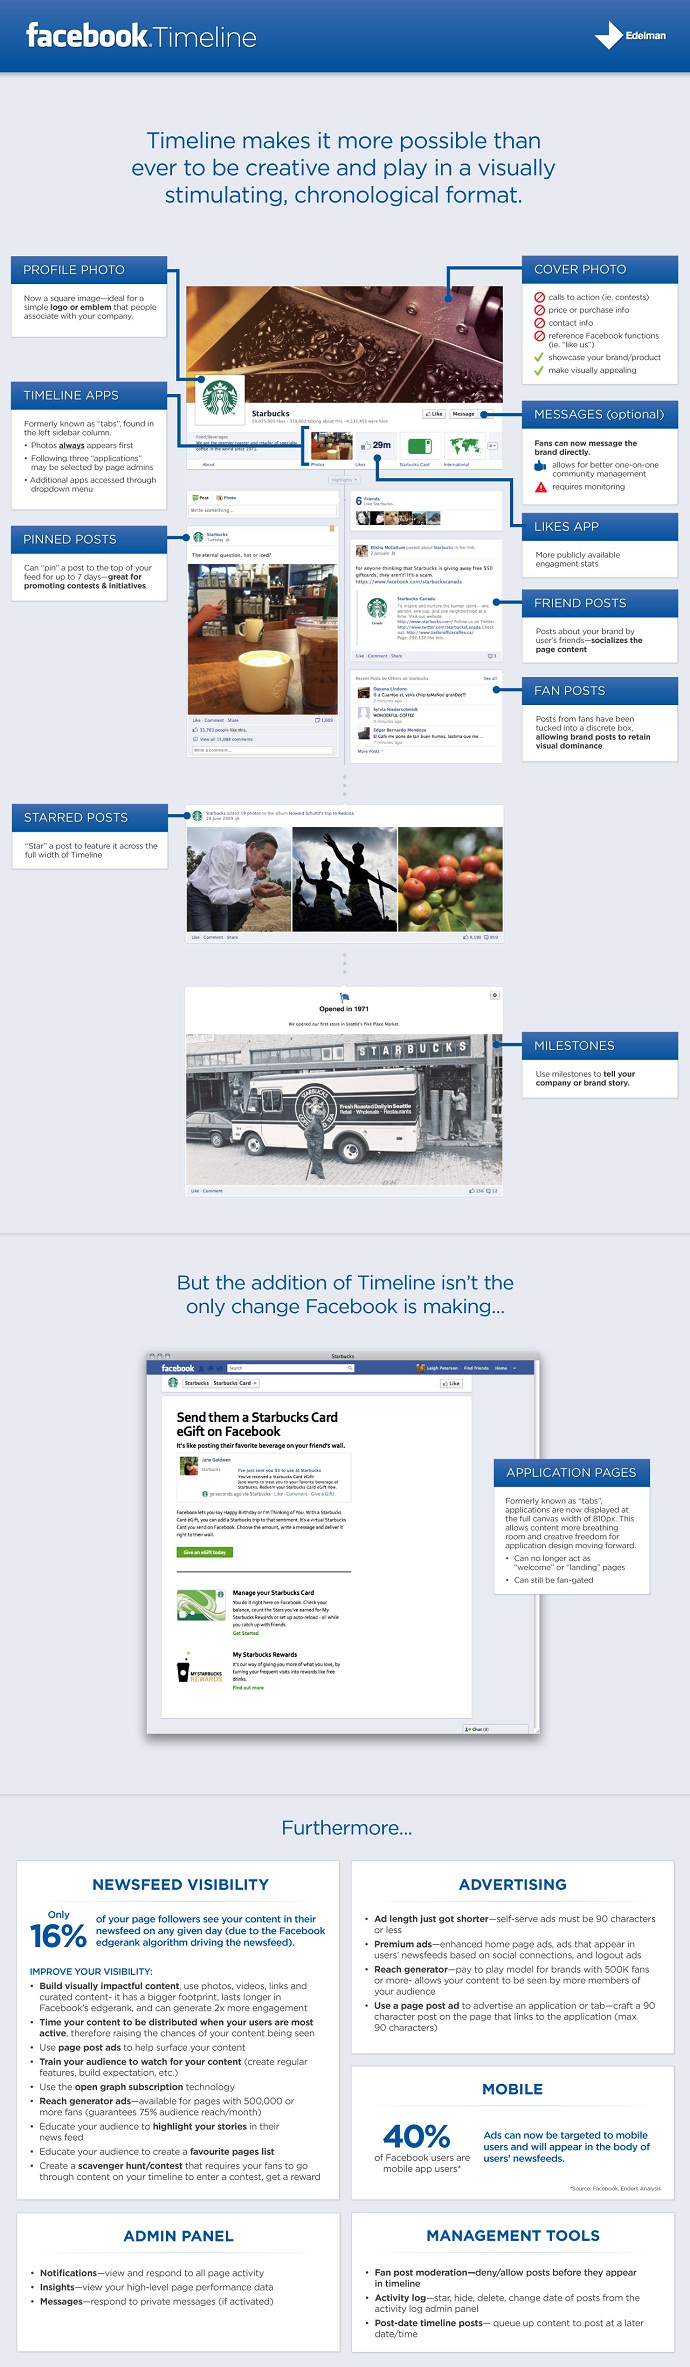 Facebook Timeline Attributes Overview Infographic